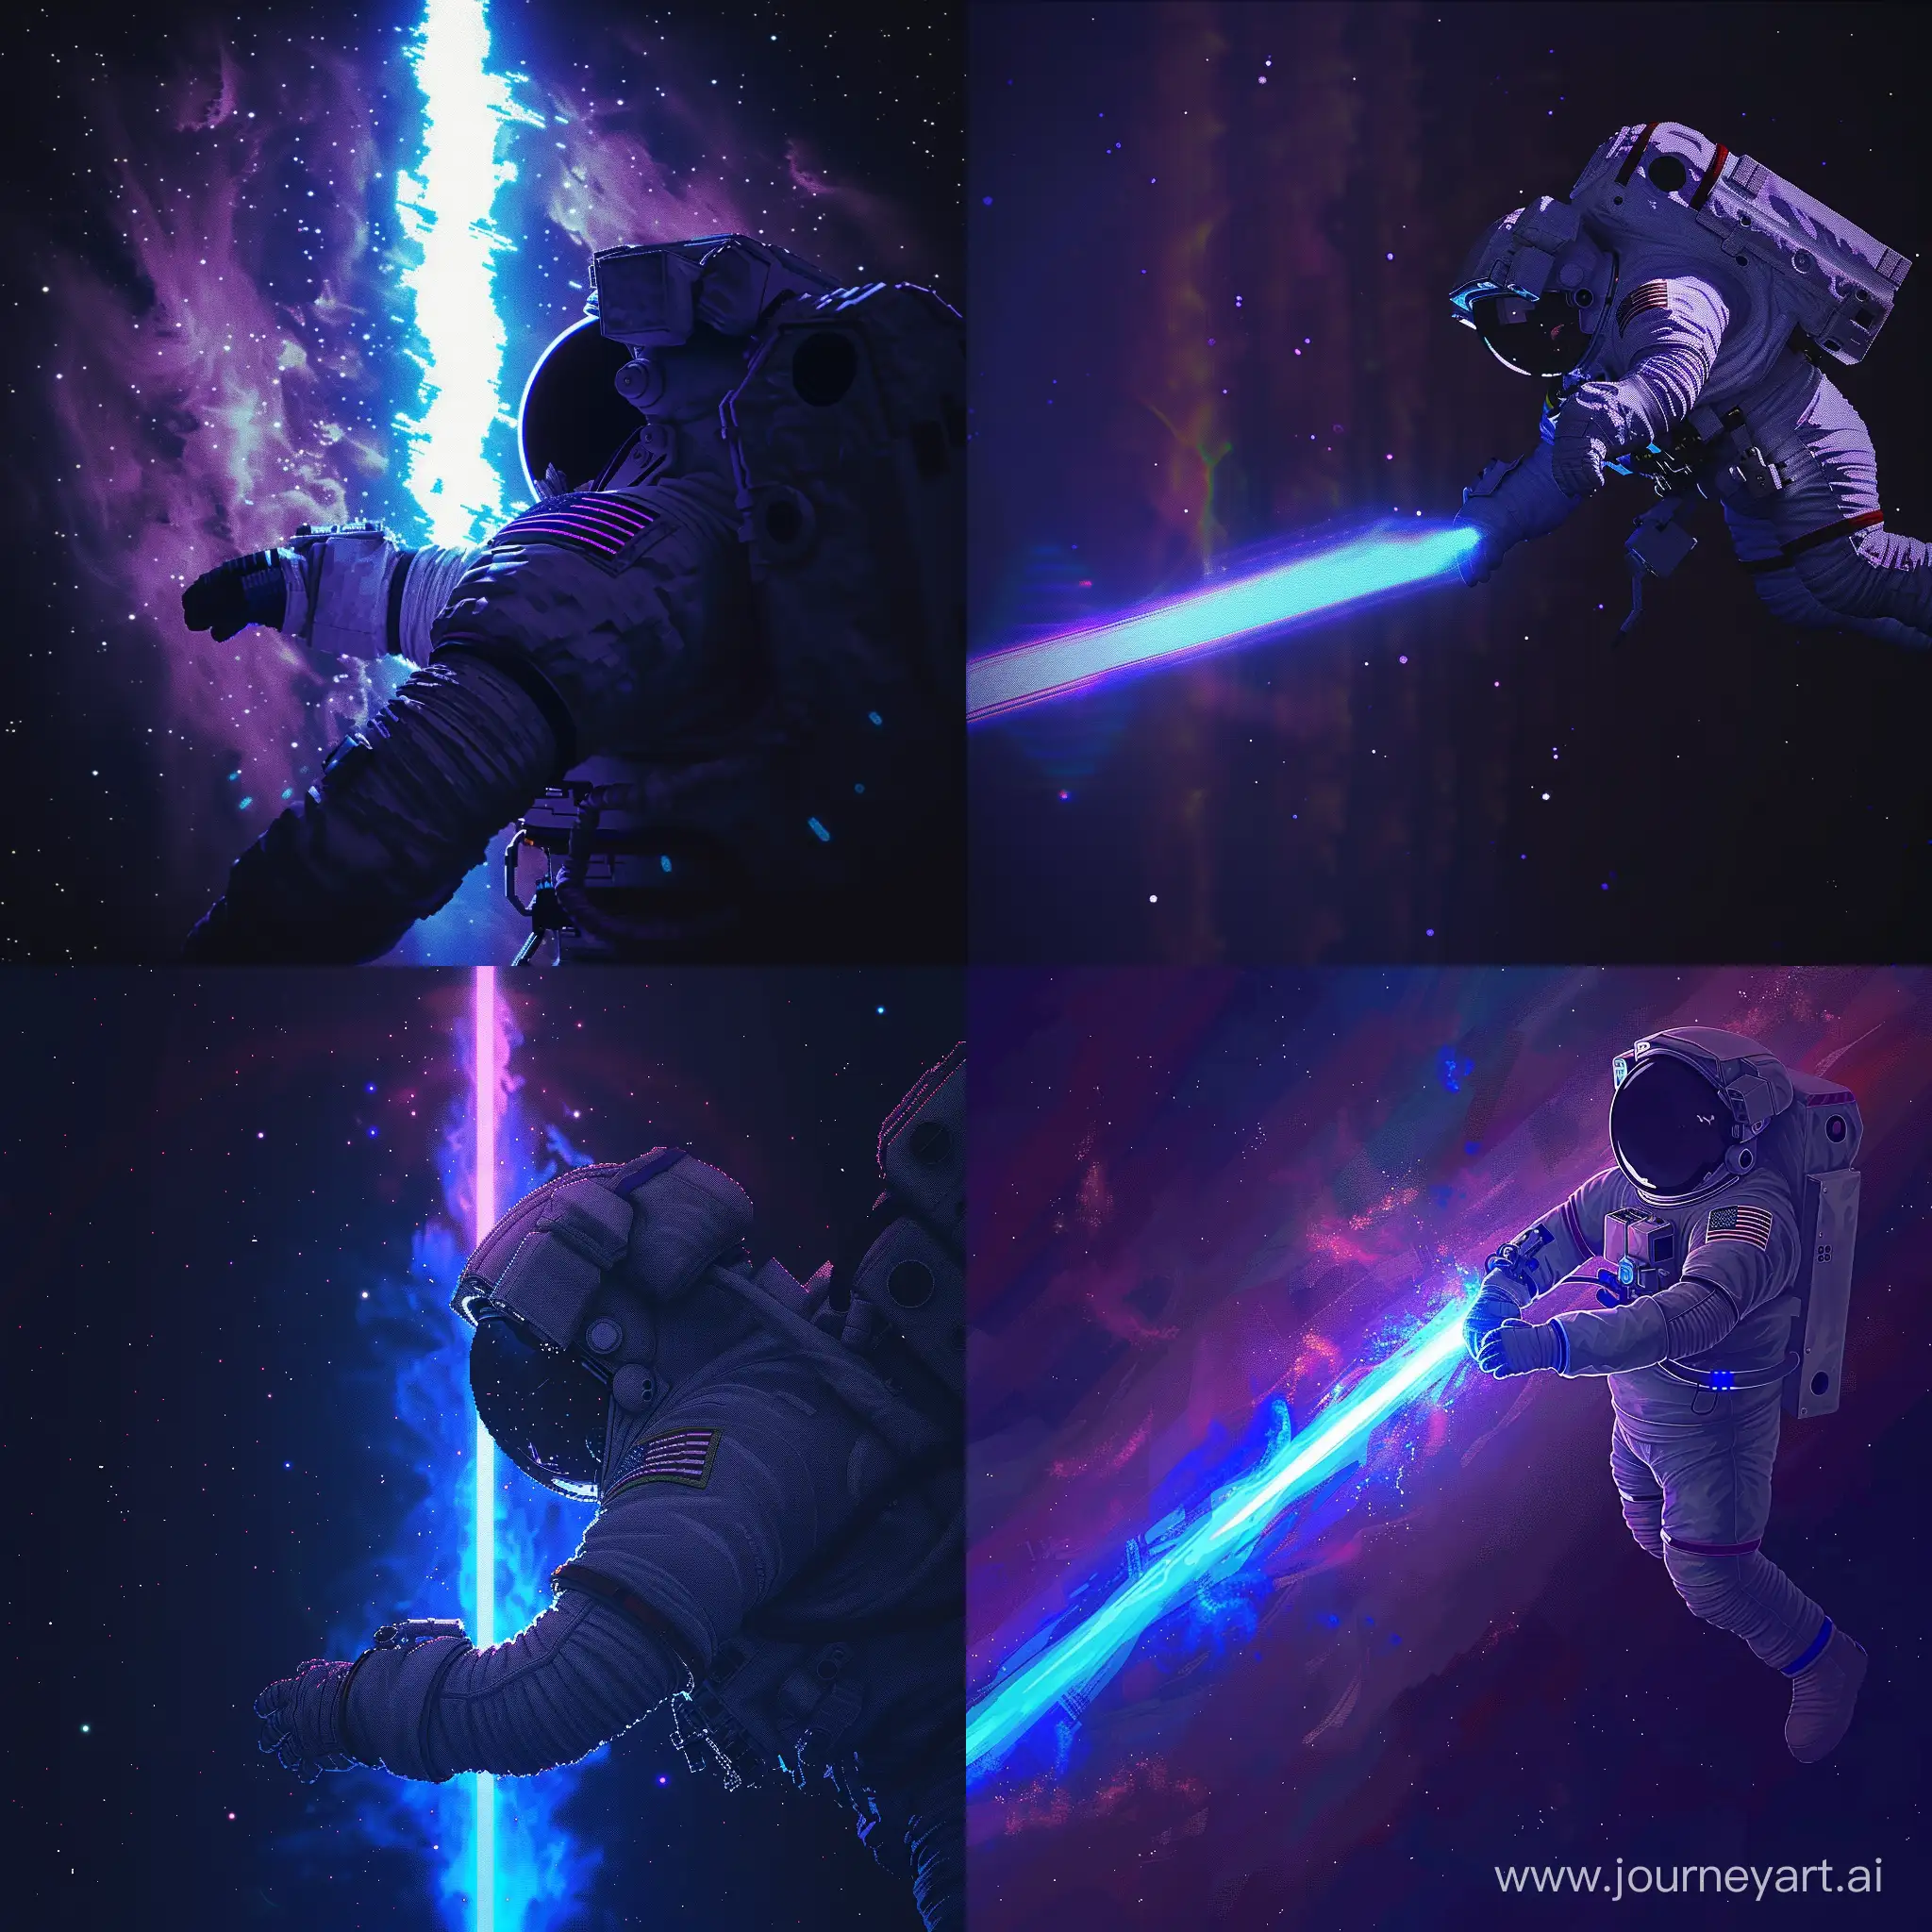 Lonely-Astronaut-in-Dark-Space-with-Blue-and-Purple-Light